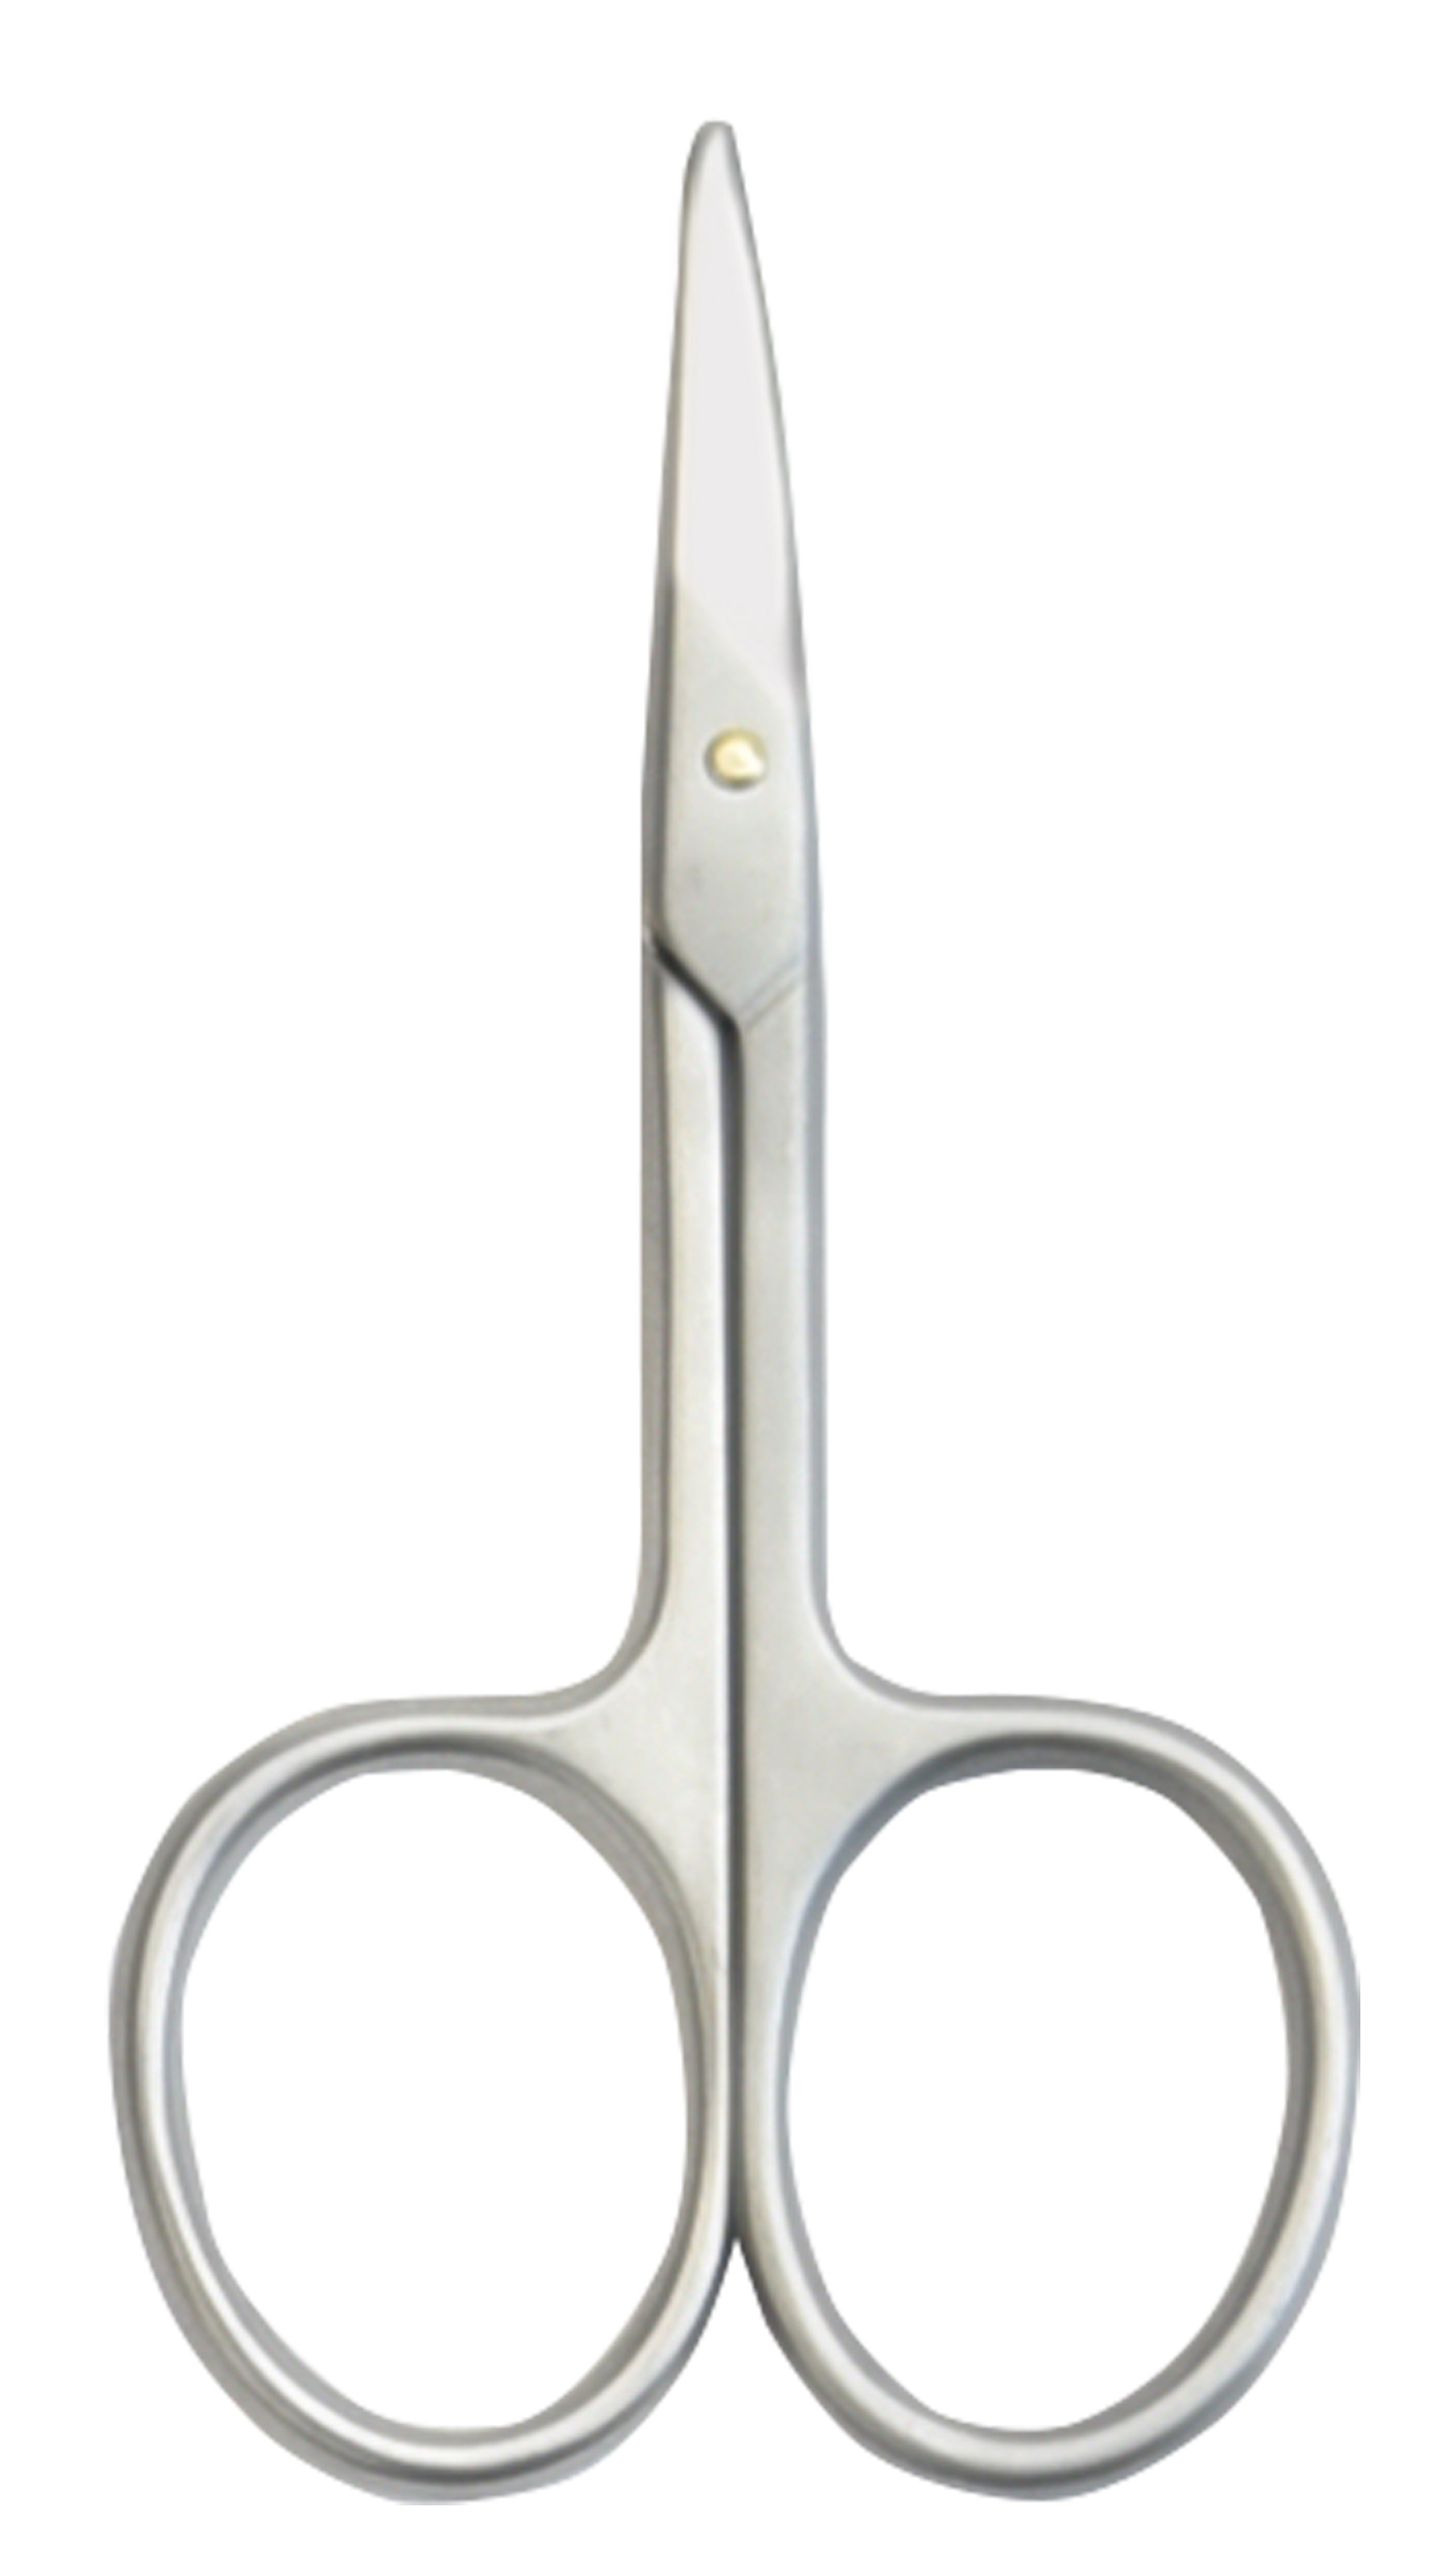 Excellent baby scissors 9.0 cm curved